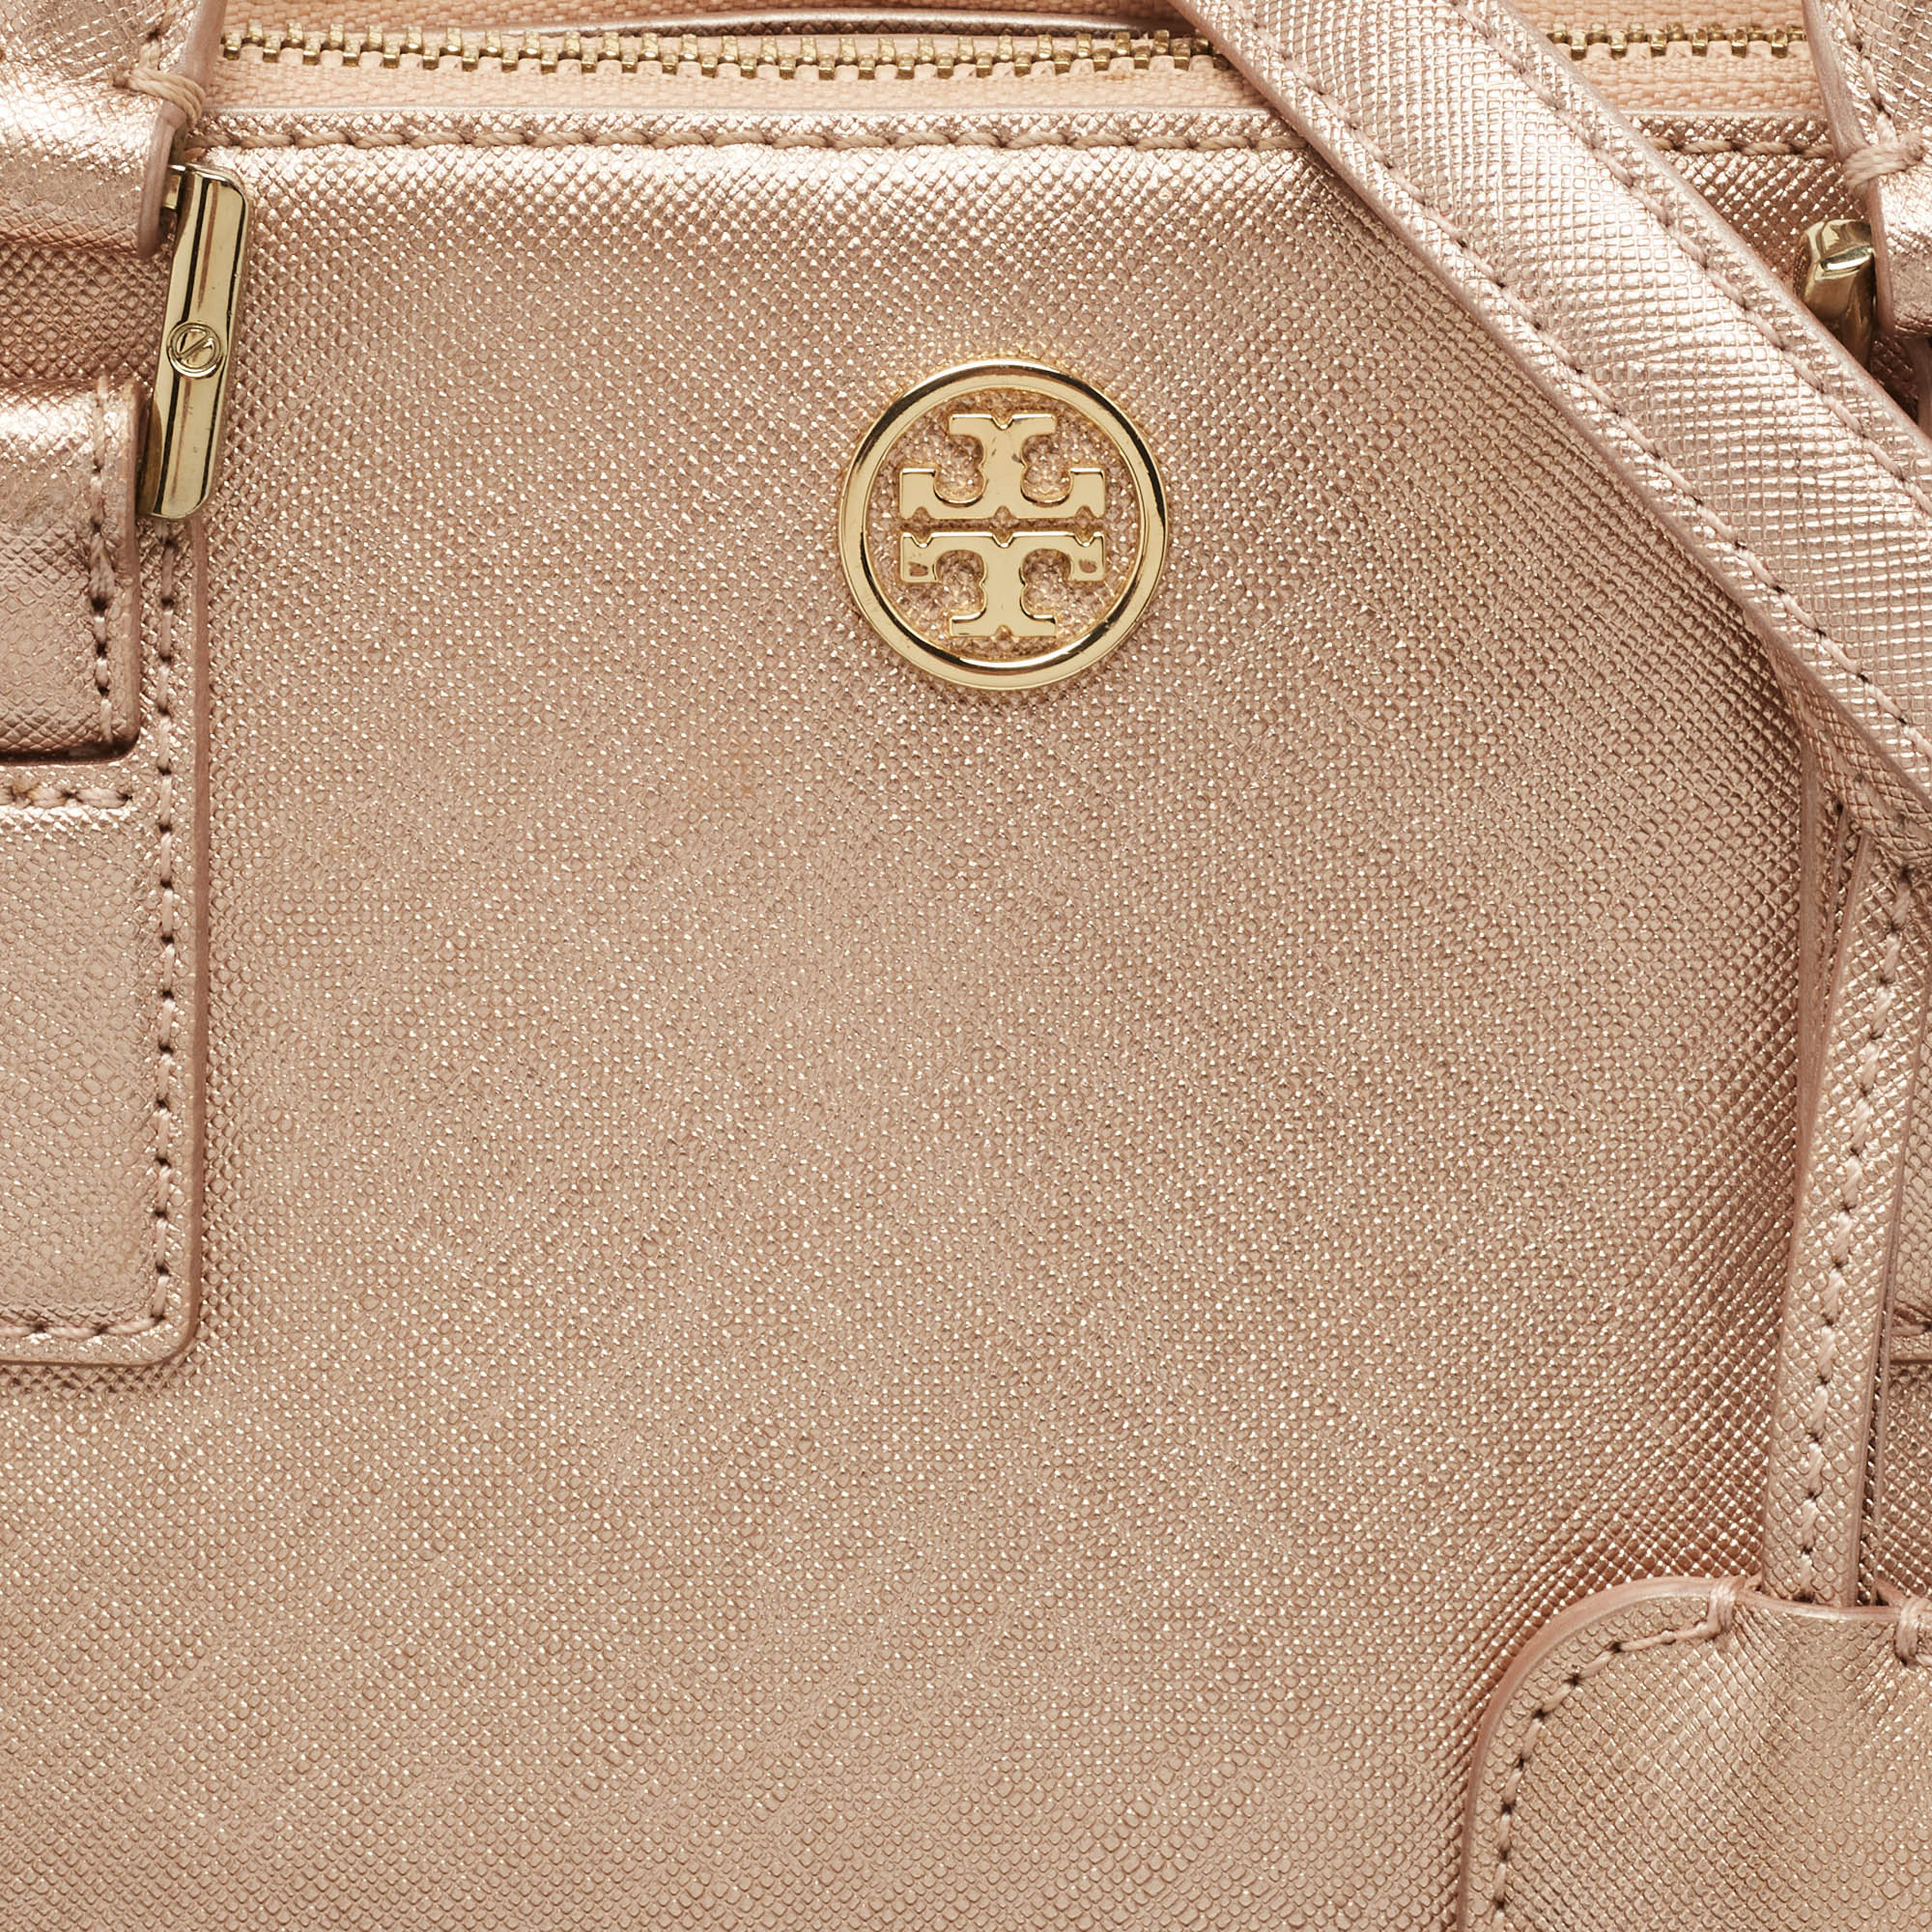 Tory Burch Rose Gold Patent Leather Small Robinson Double Zip Tote